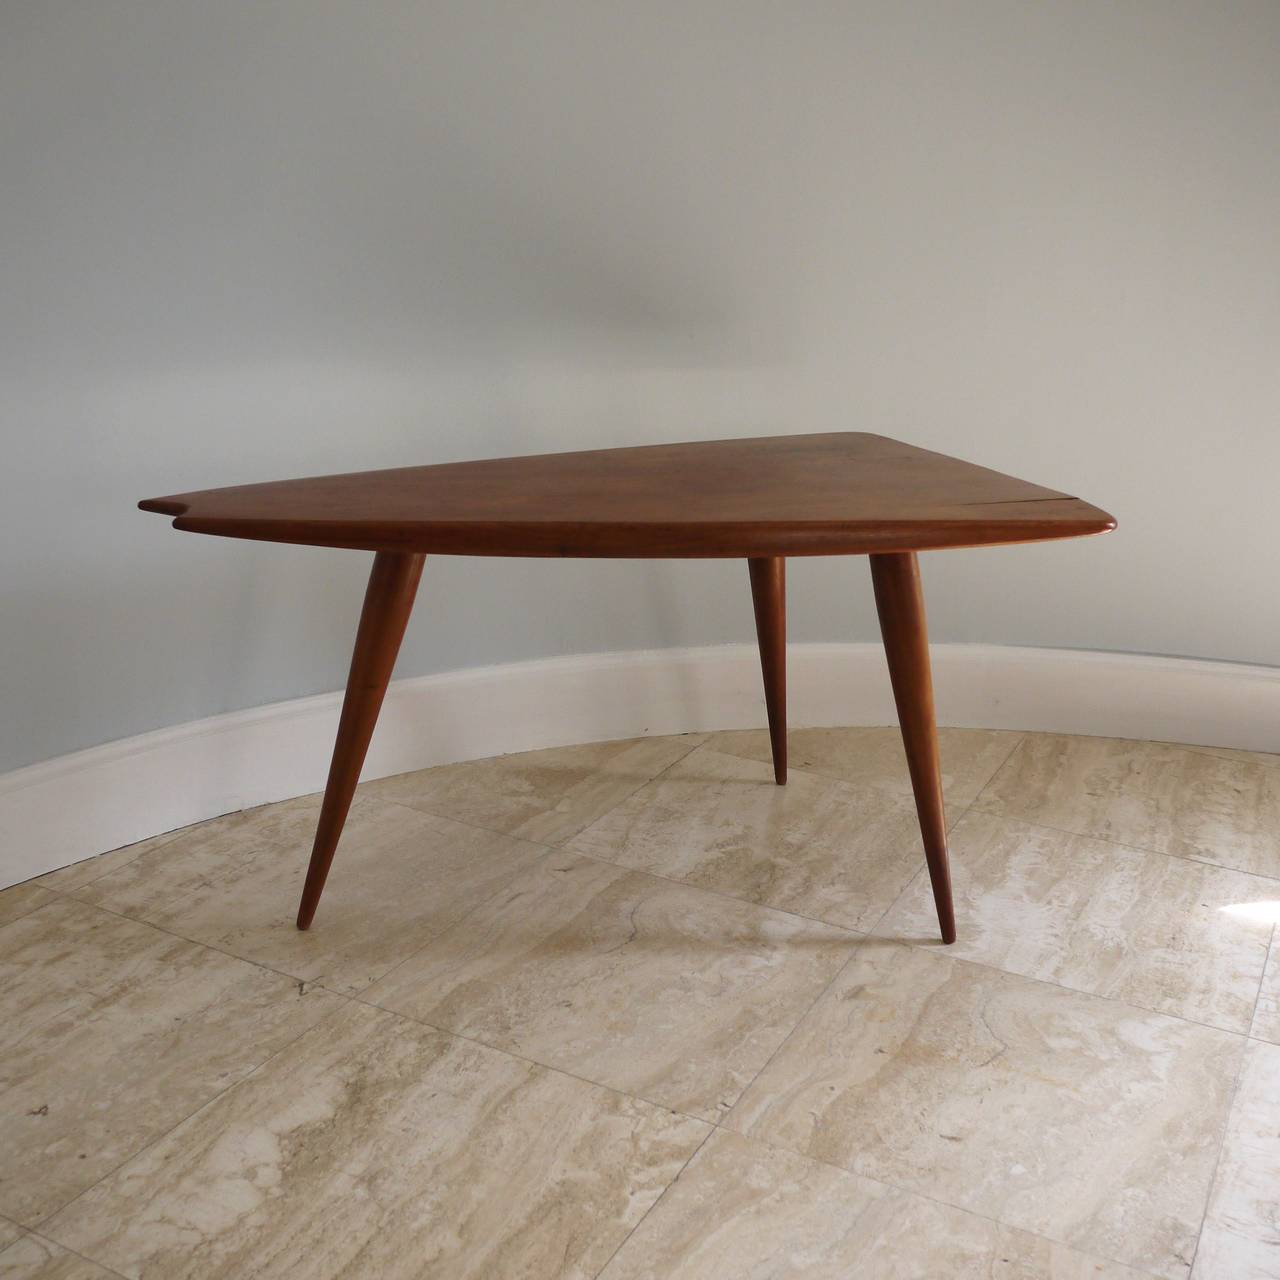 Rare mahogany side table with three legs by Pierre Cruège in 1955.